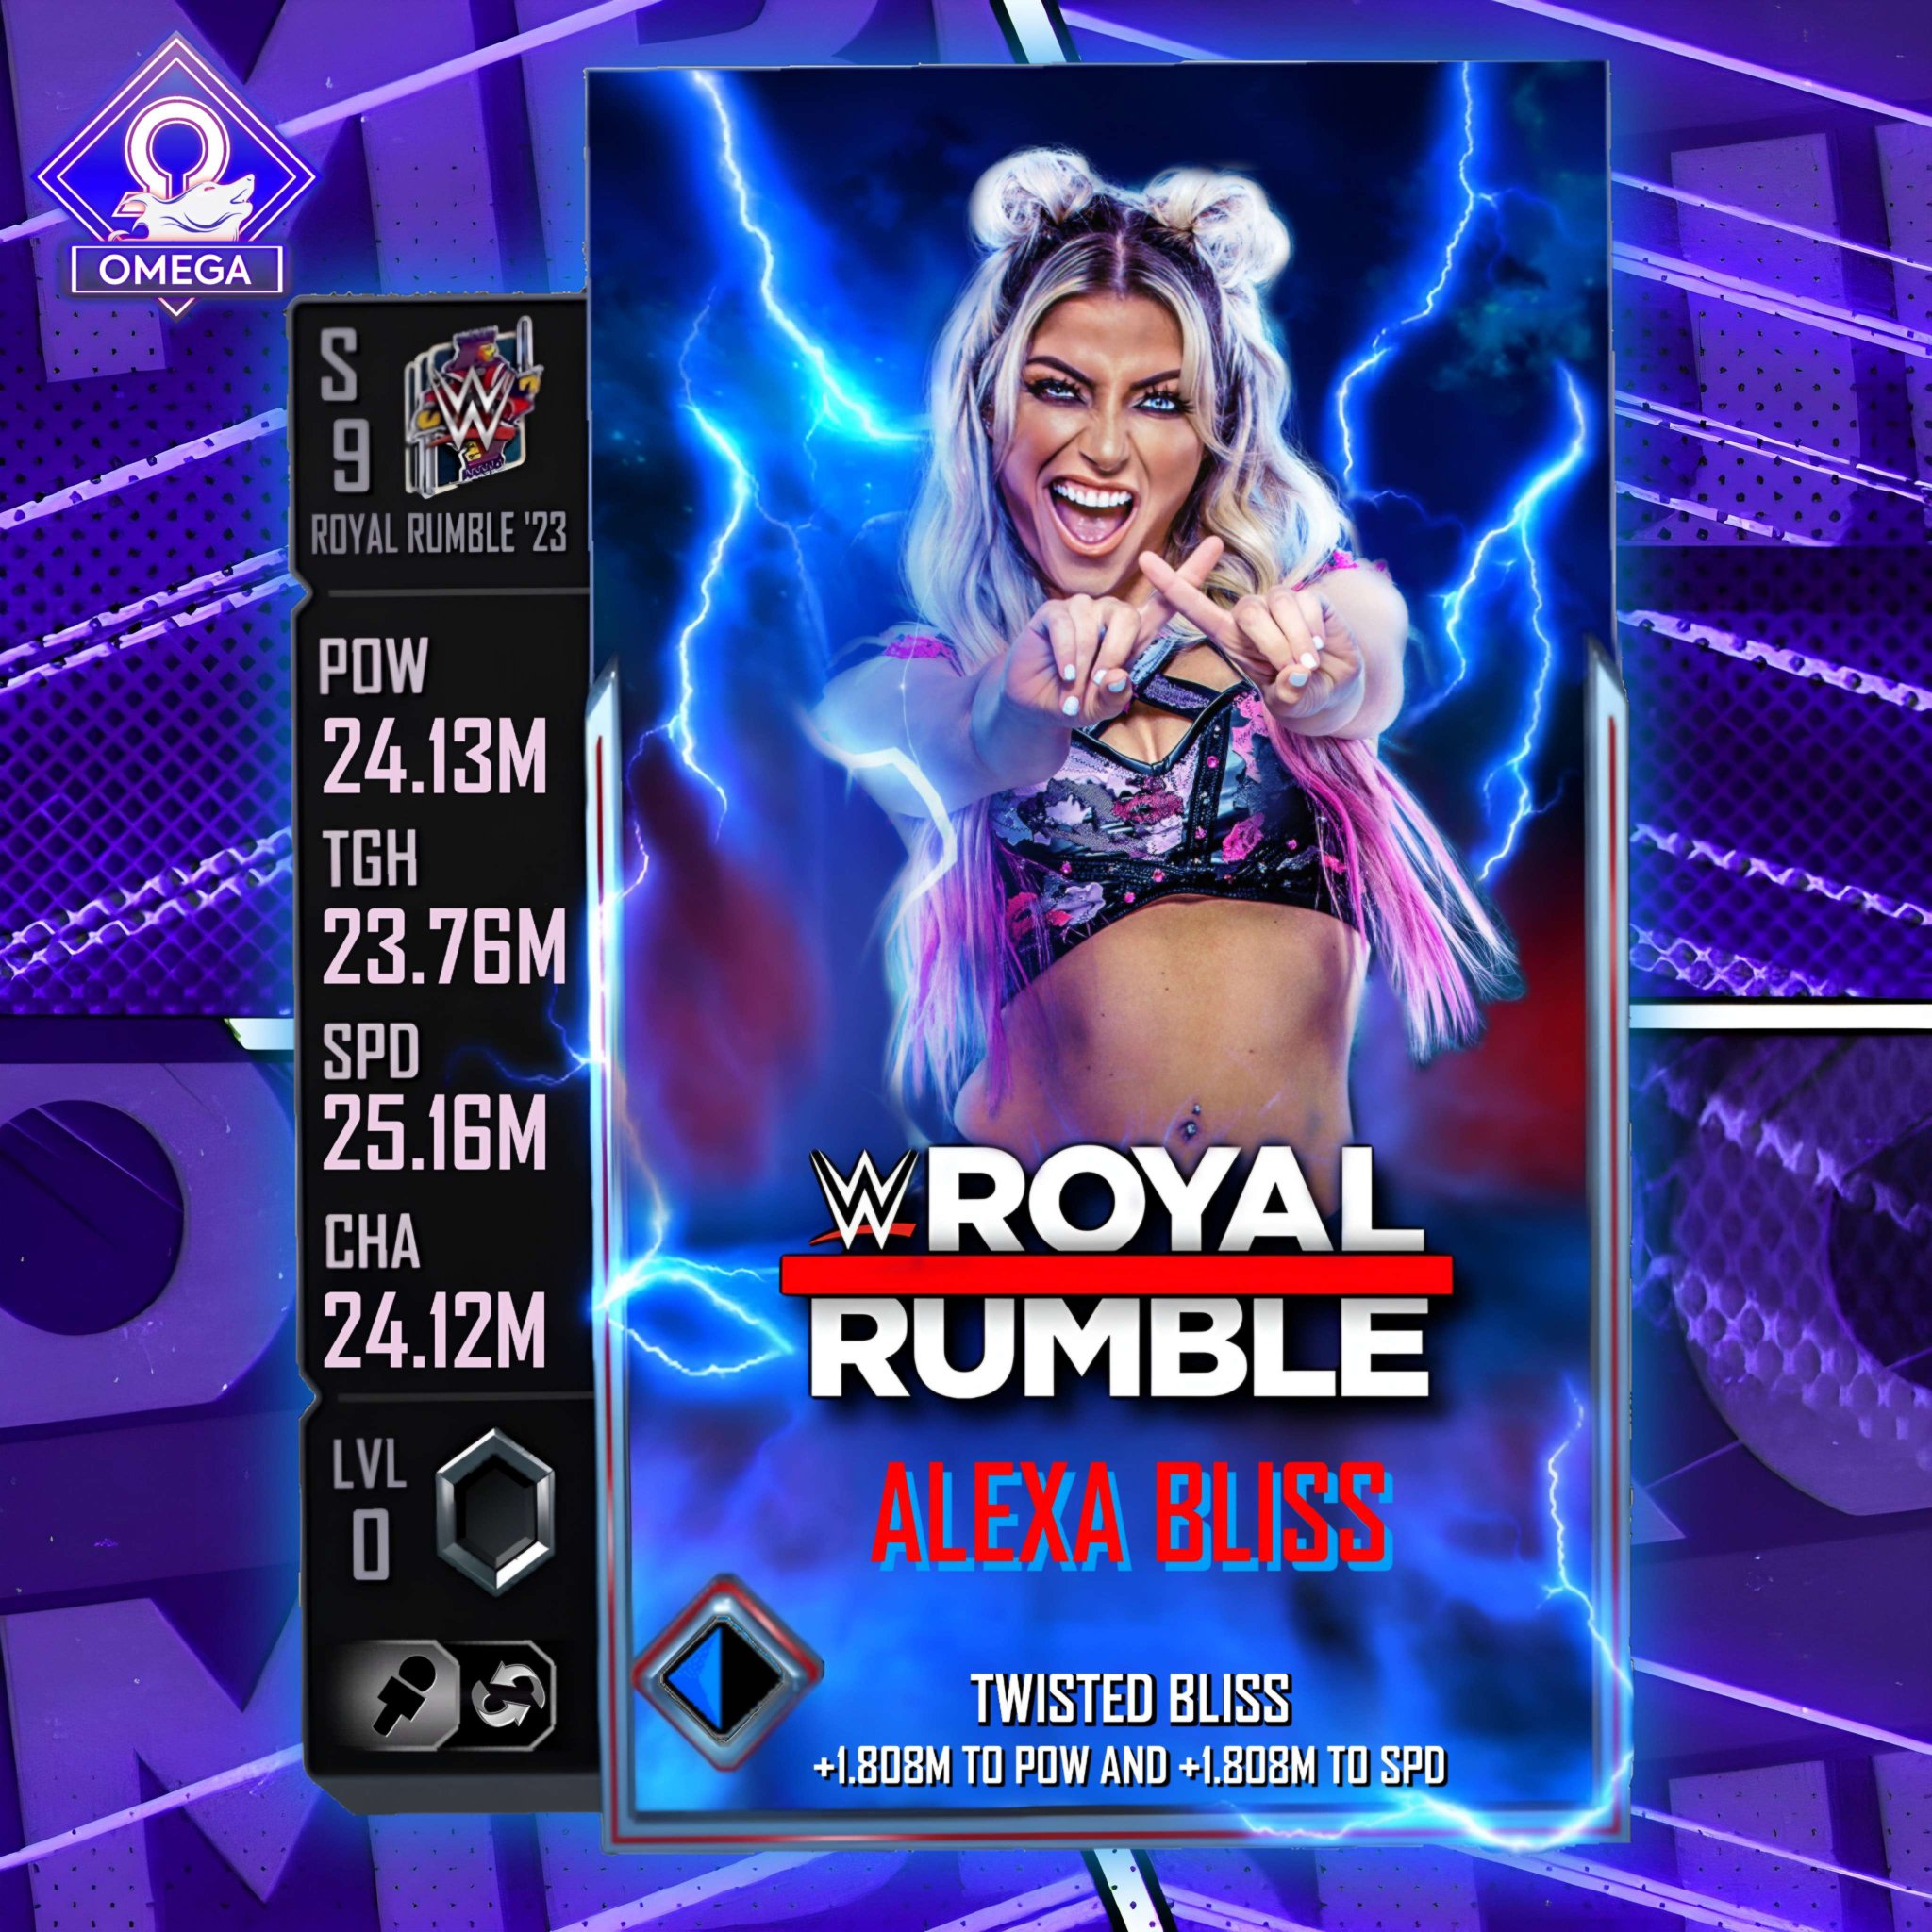 Alexa Bliss - WWE SuperCard Season 4 is out now! Check out my new